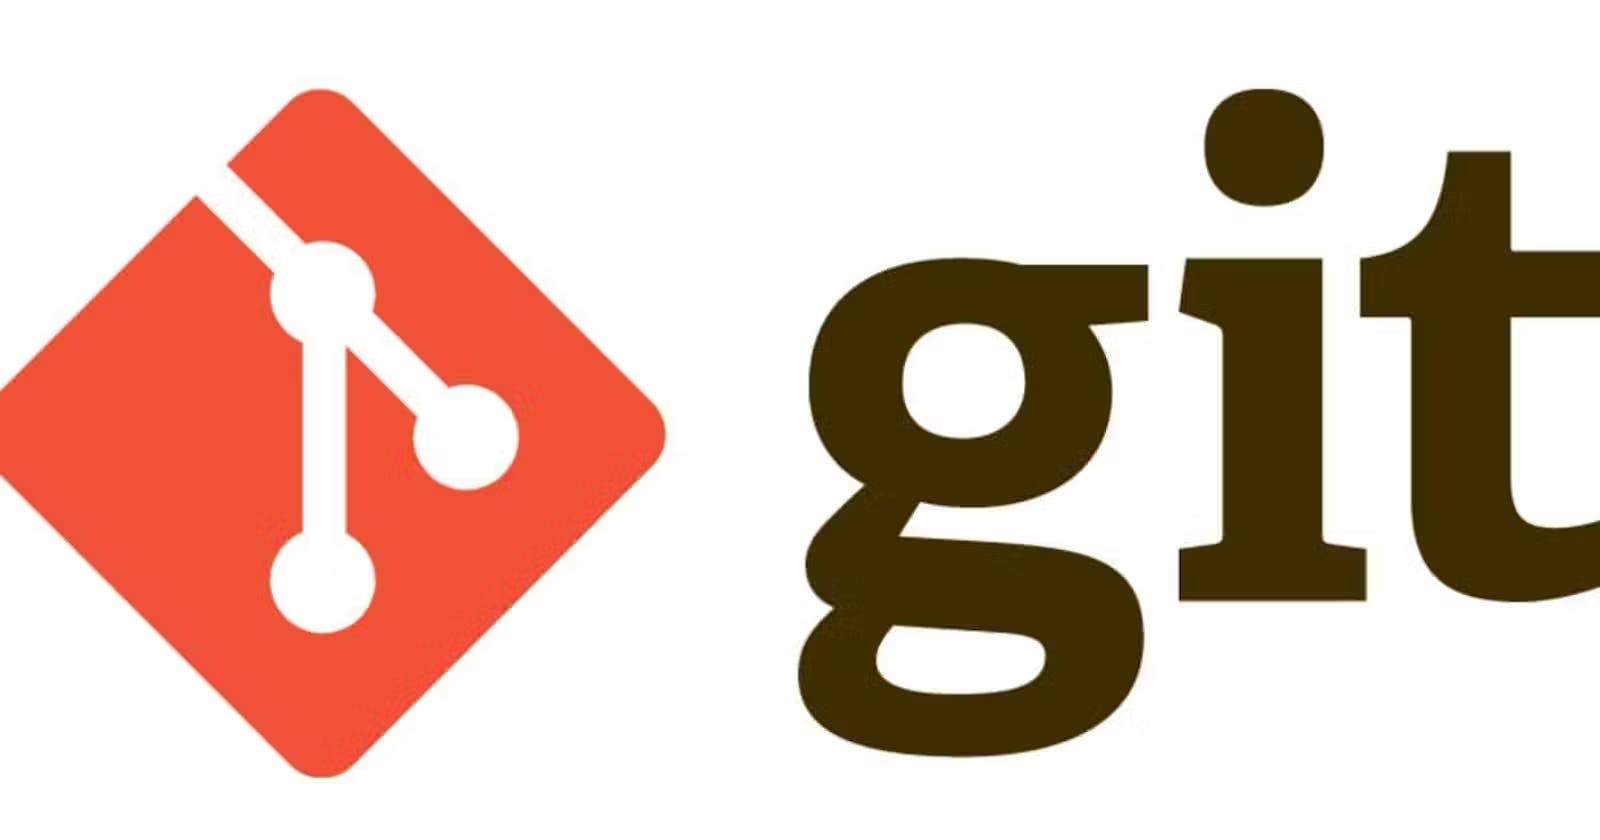 Getting Started with Git for Beginners